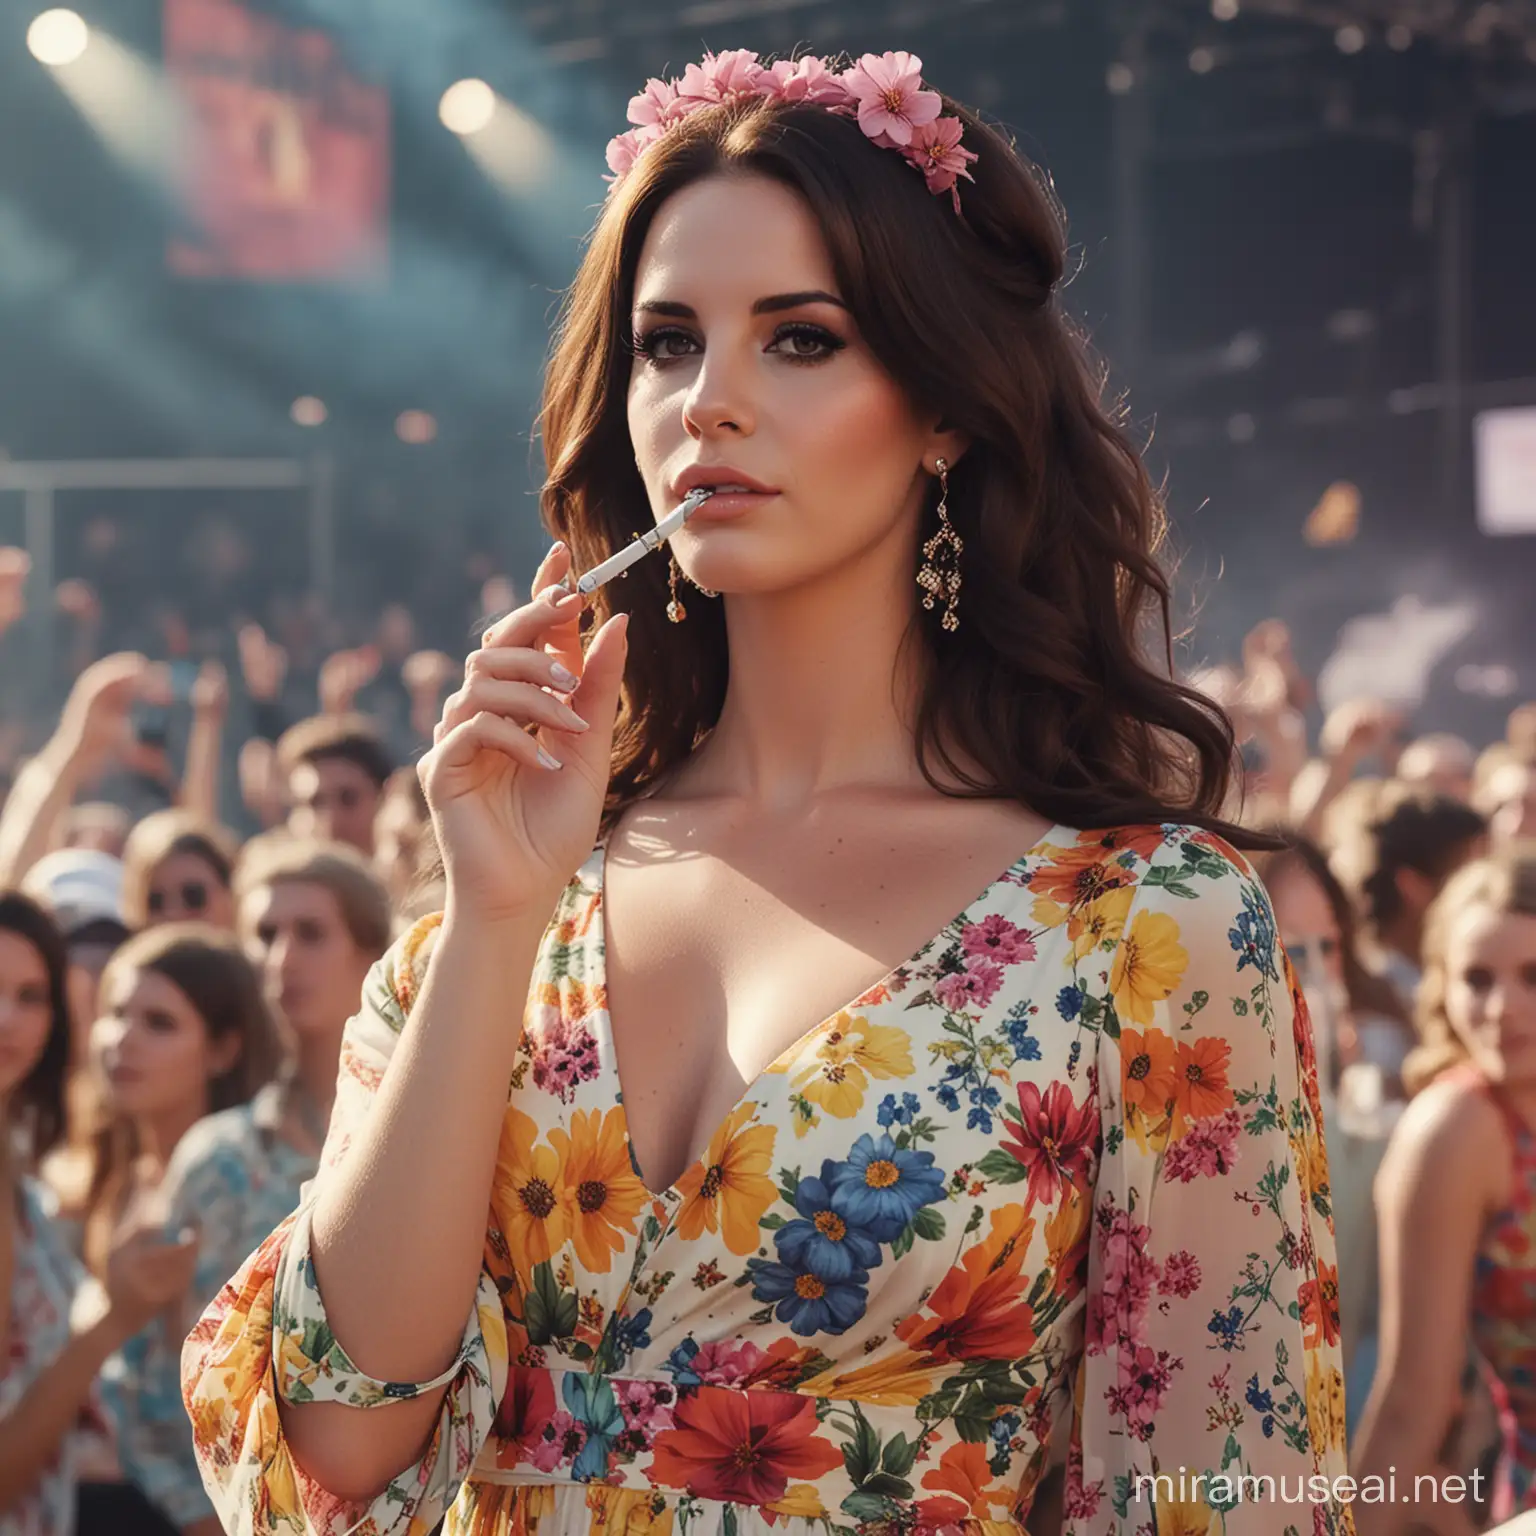 Photorealistic picture of lana del rey holding a cigarette, wearing makeup with a thin long eyeliner on a festival stage. Wearing a long floral dress with lots of colors.
Shot from distance